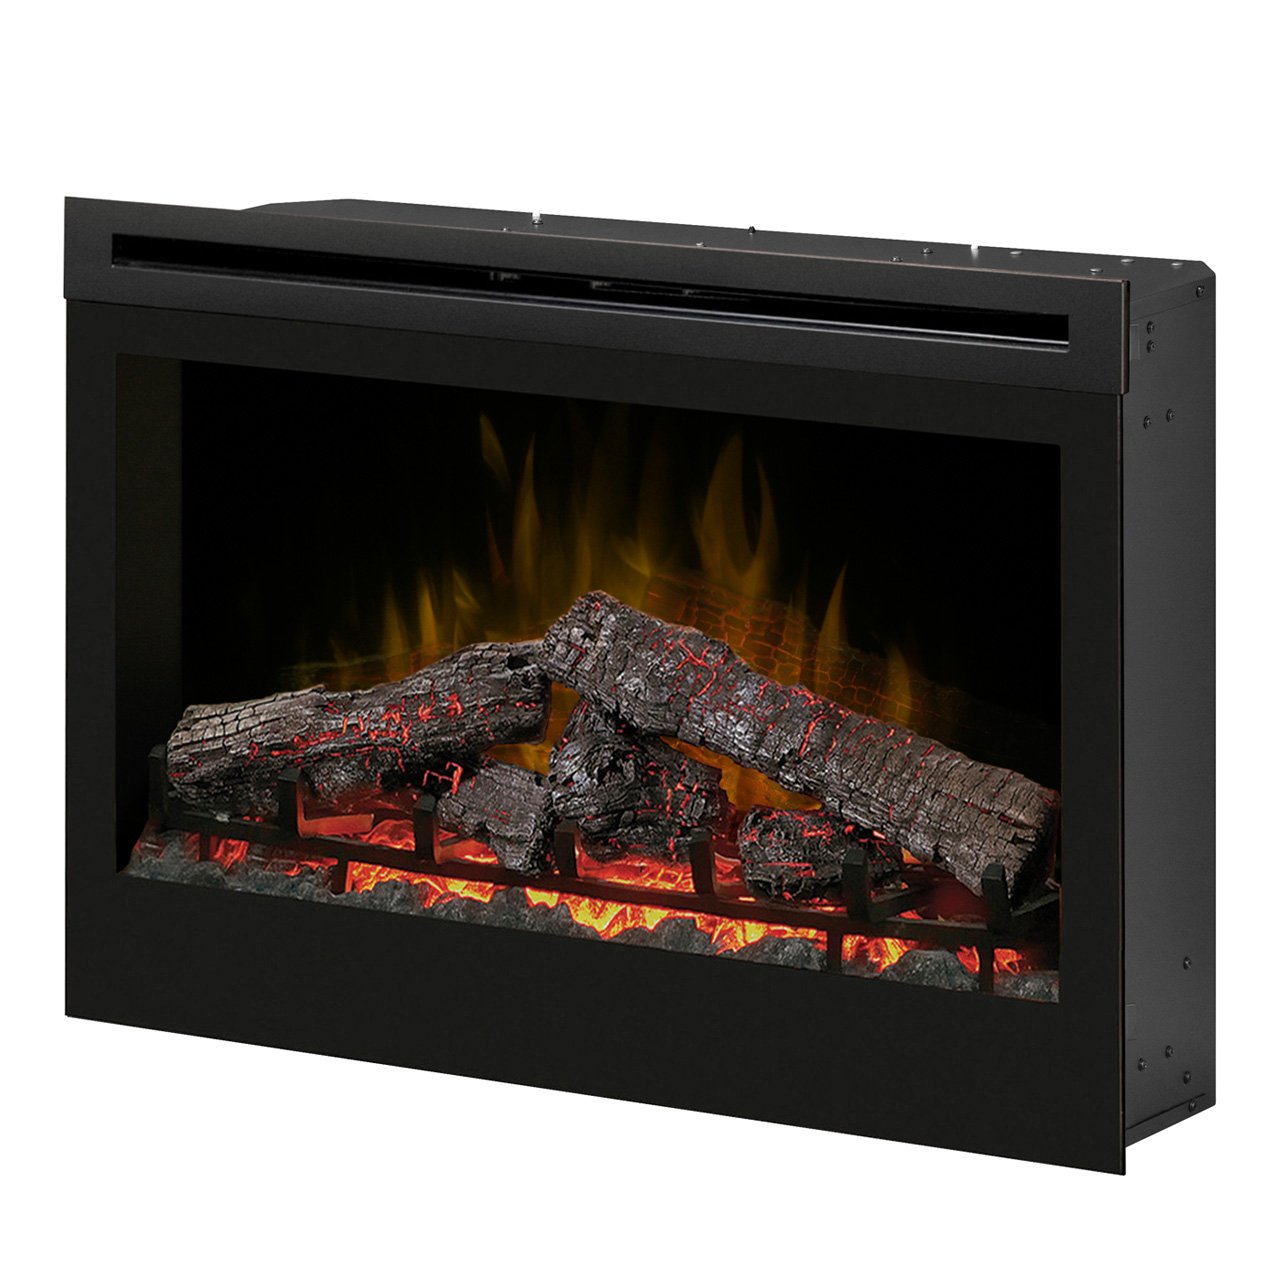 Decorative Fireplace Logs Inspirational Dimplex Df3033st 33 Inch Self Trimming Electric Fireplace Insert